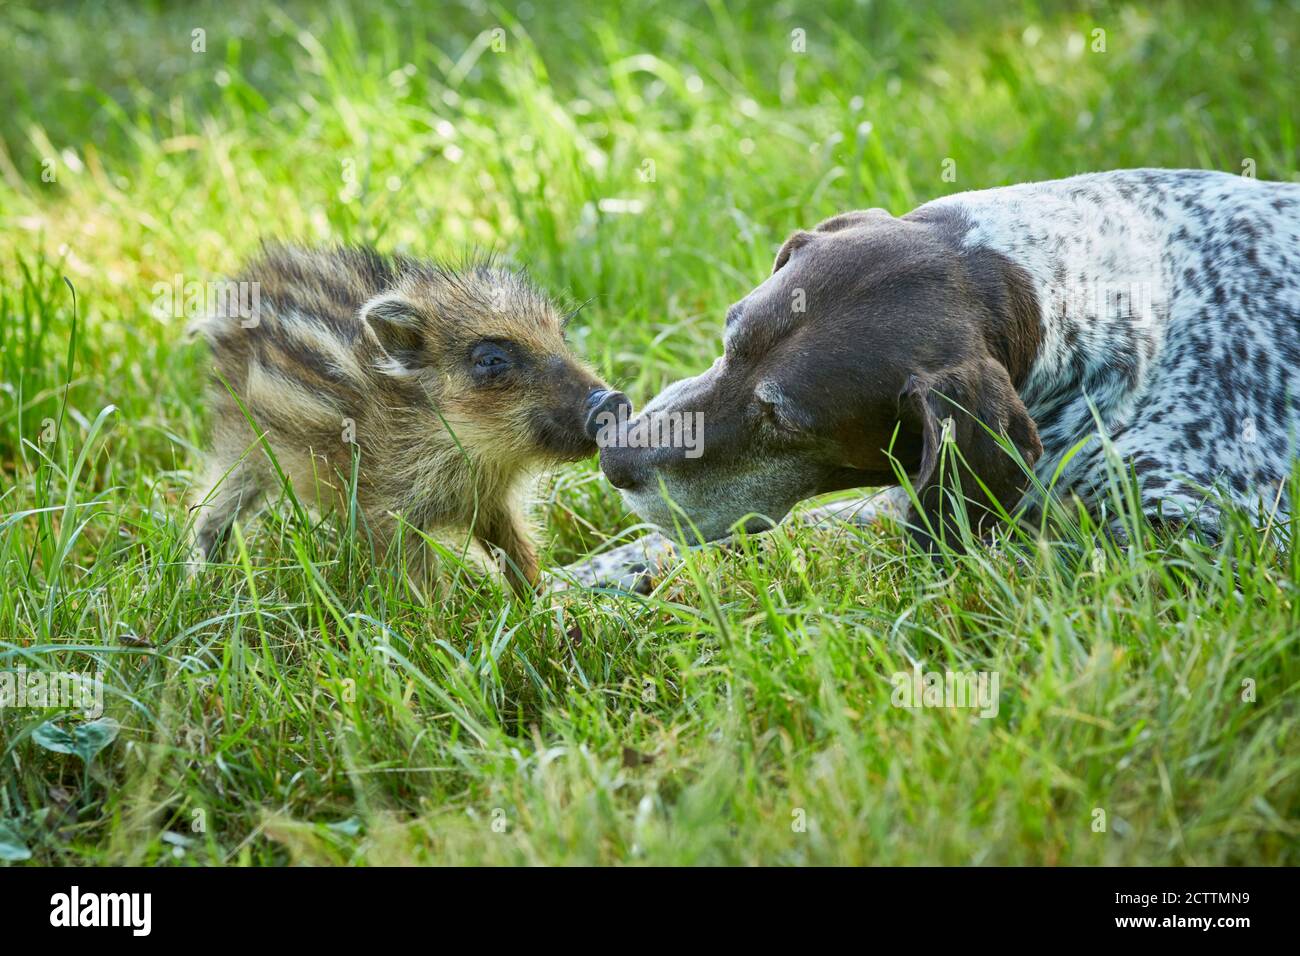 Animal friendship: Wild Boar and domestic dog. Shoat and adult German Shorthaired Pointer smooching on a meadow. Stock Photo